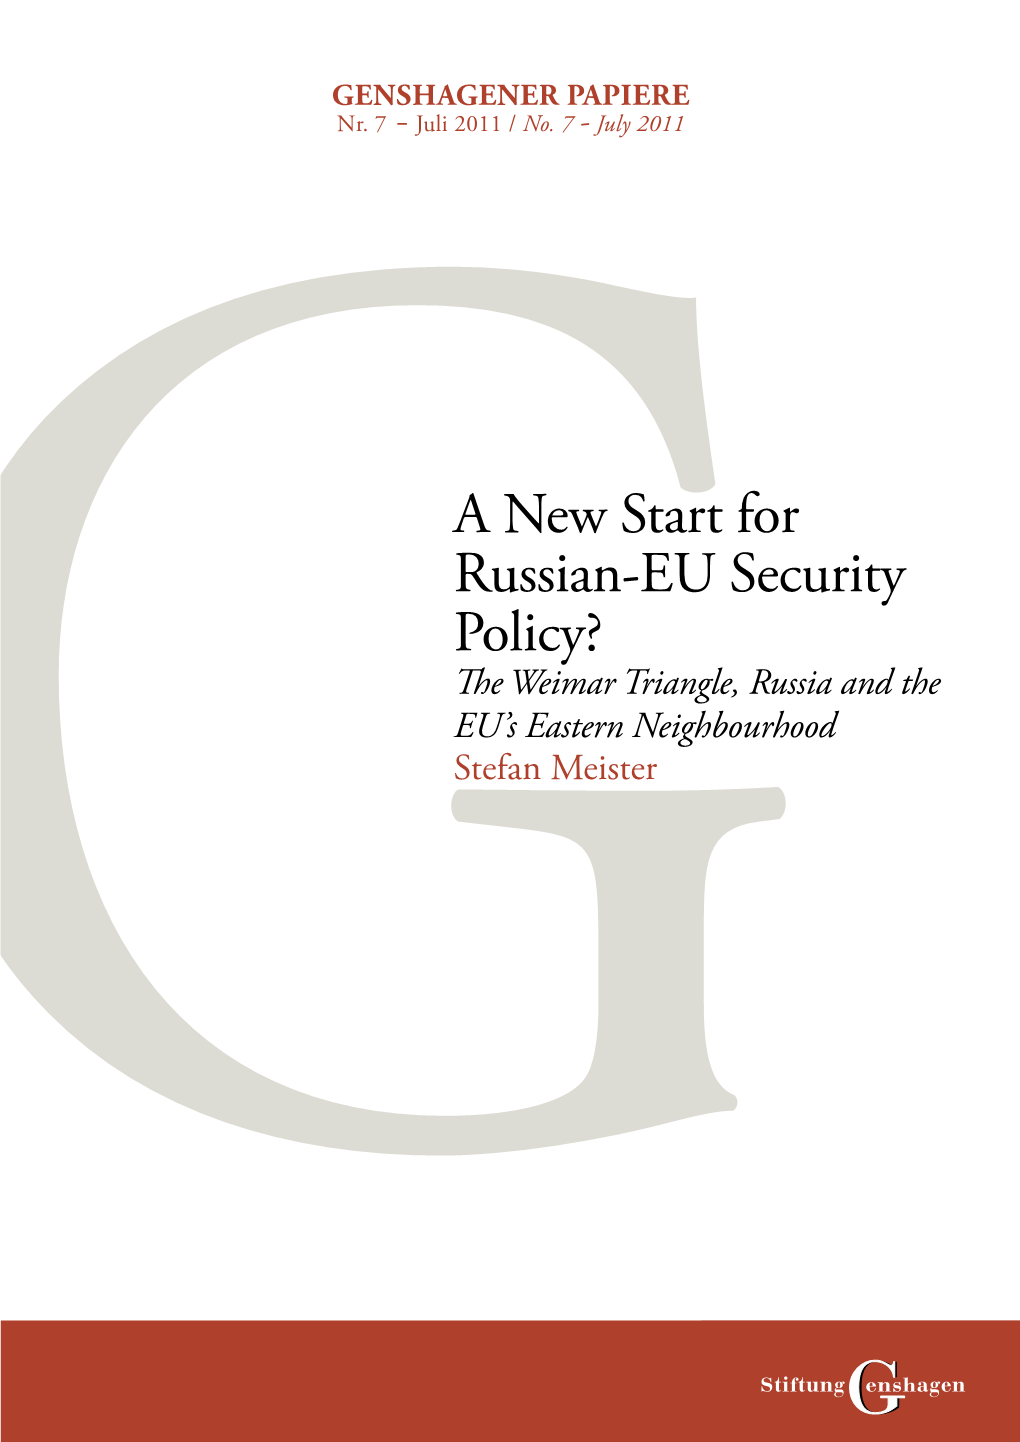 A New Start for Russian-EU Security Policy?